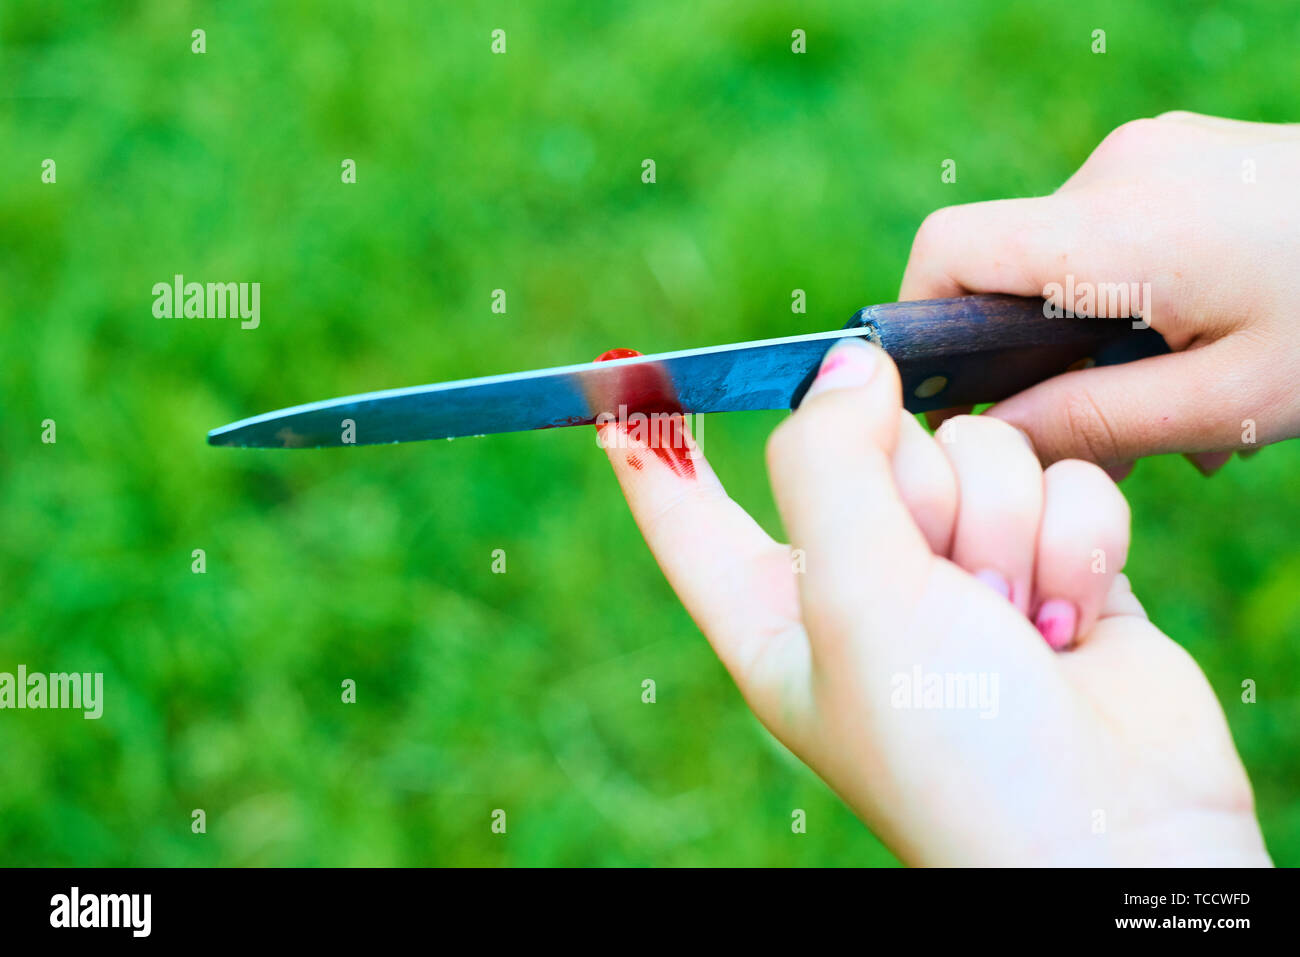 Accident wounded on finger with blood and knife. Child playing with knife. Self injure Stock Photo